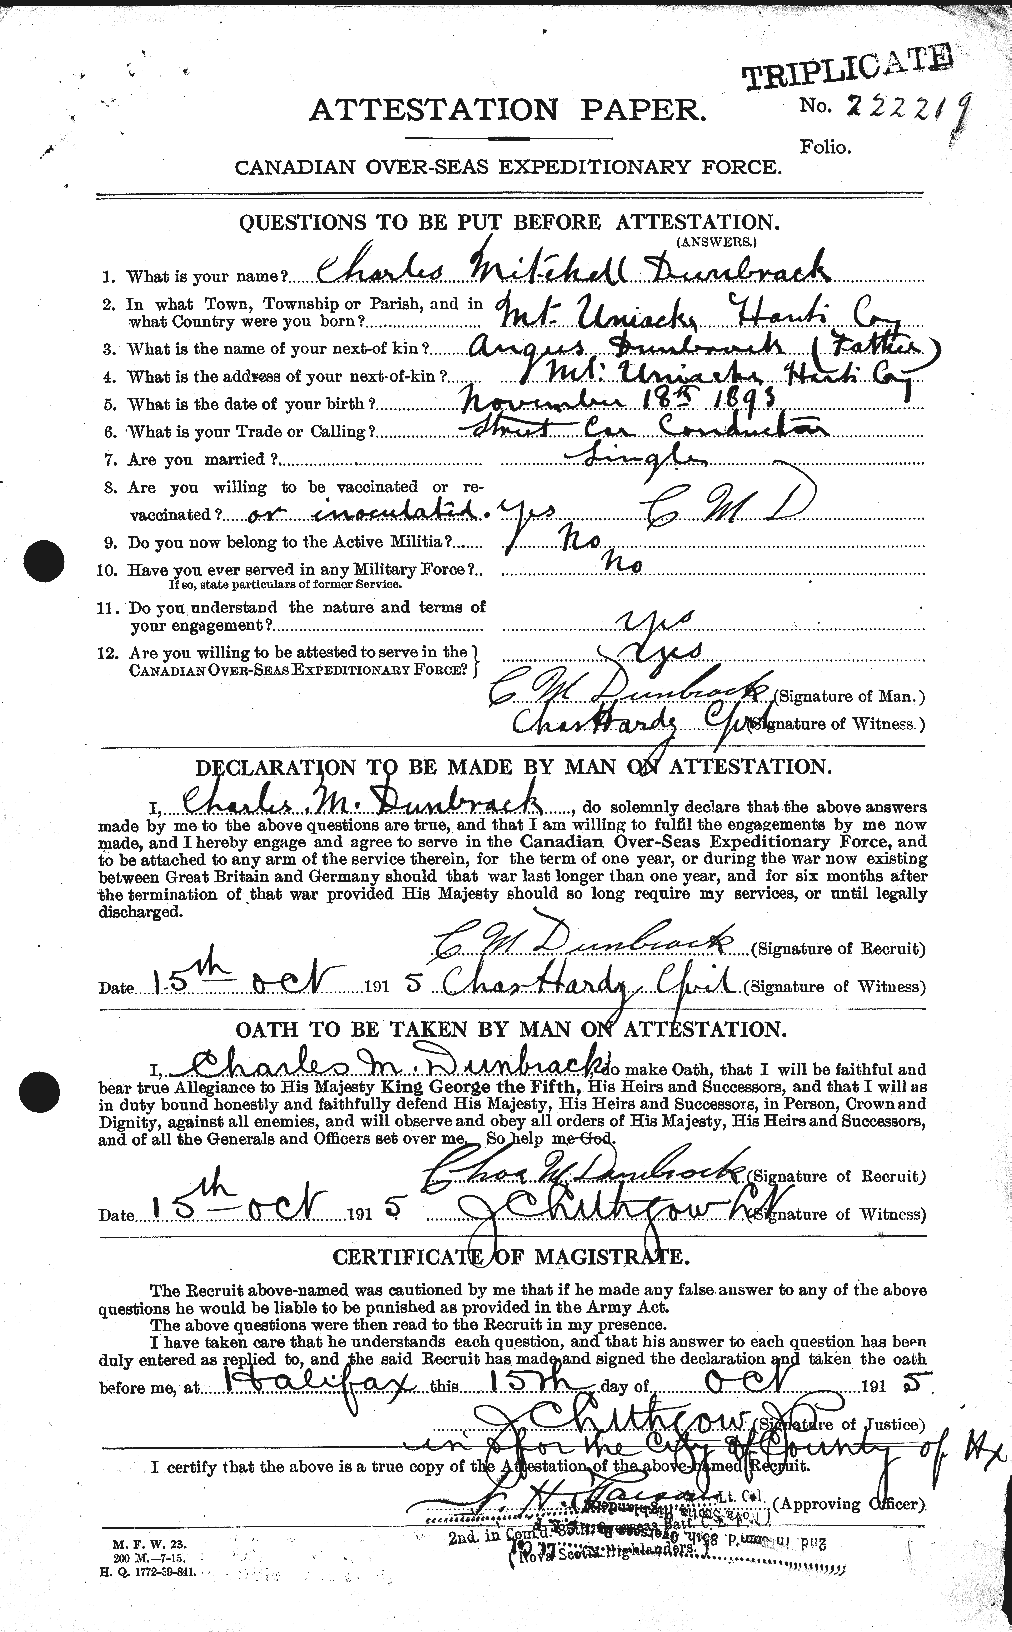 Personnel Records of the First World War - CEF 301587a